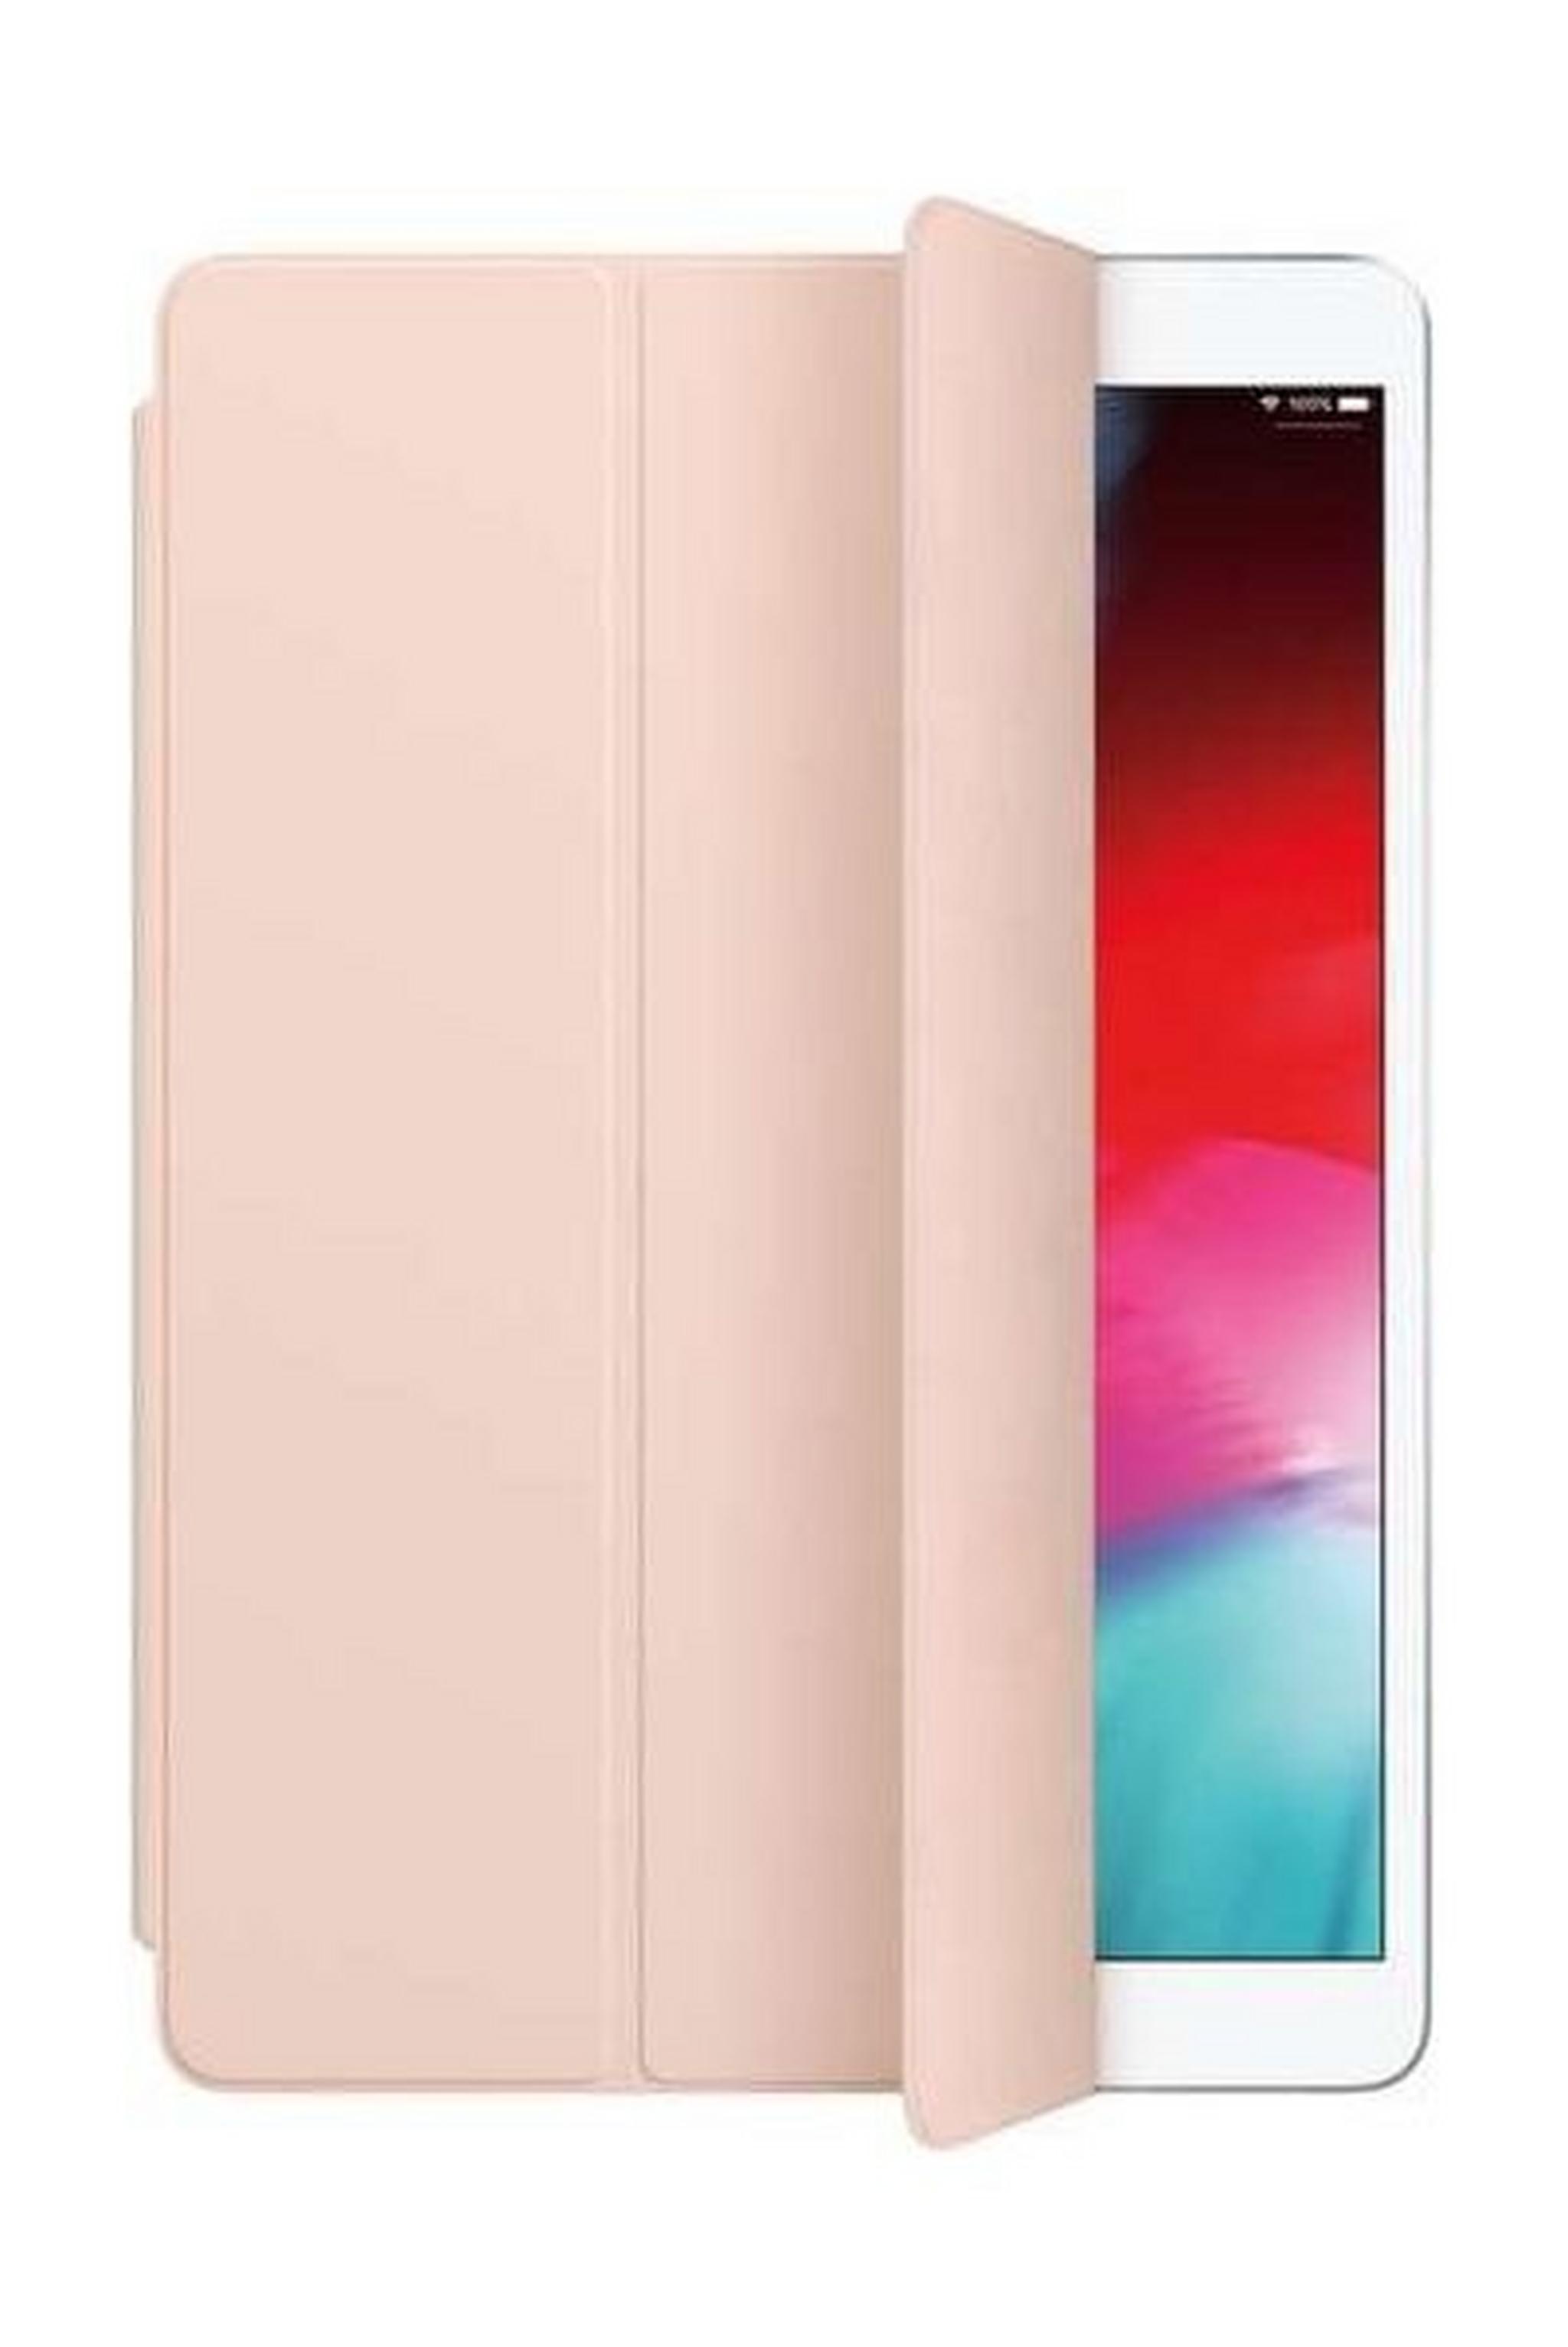 Apple Smart Cover for 10.5-inch iPad Air - Pink